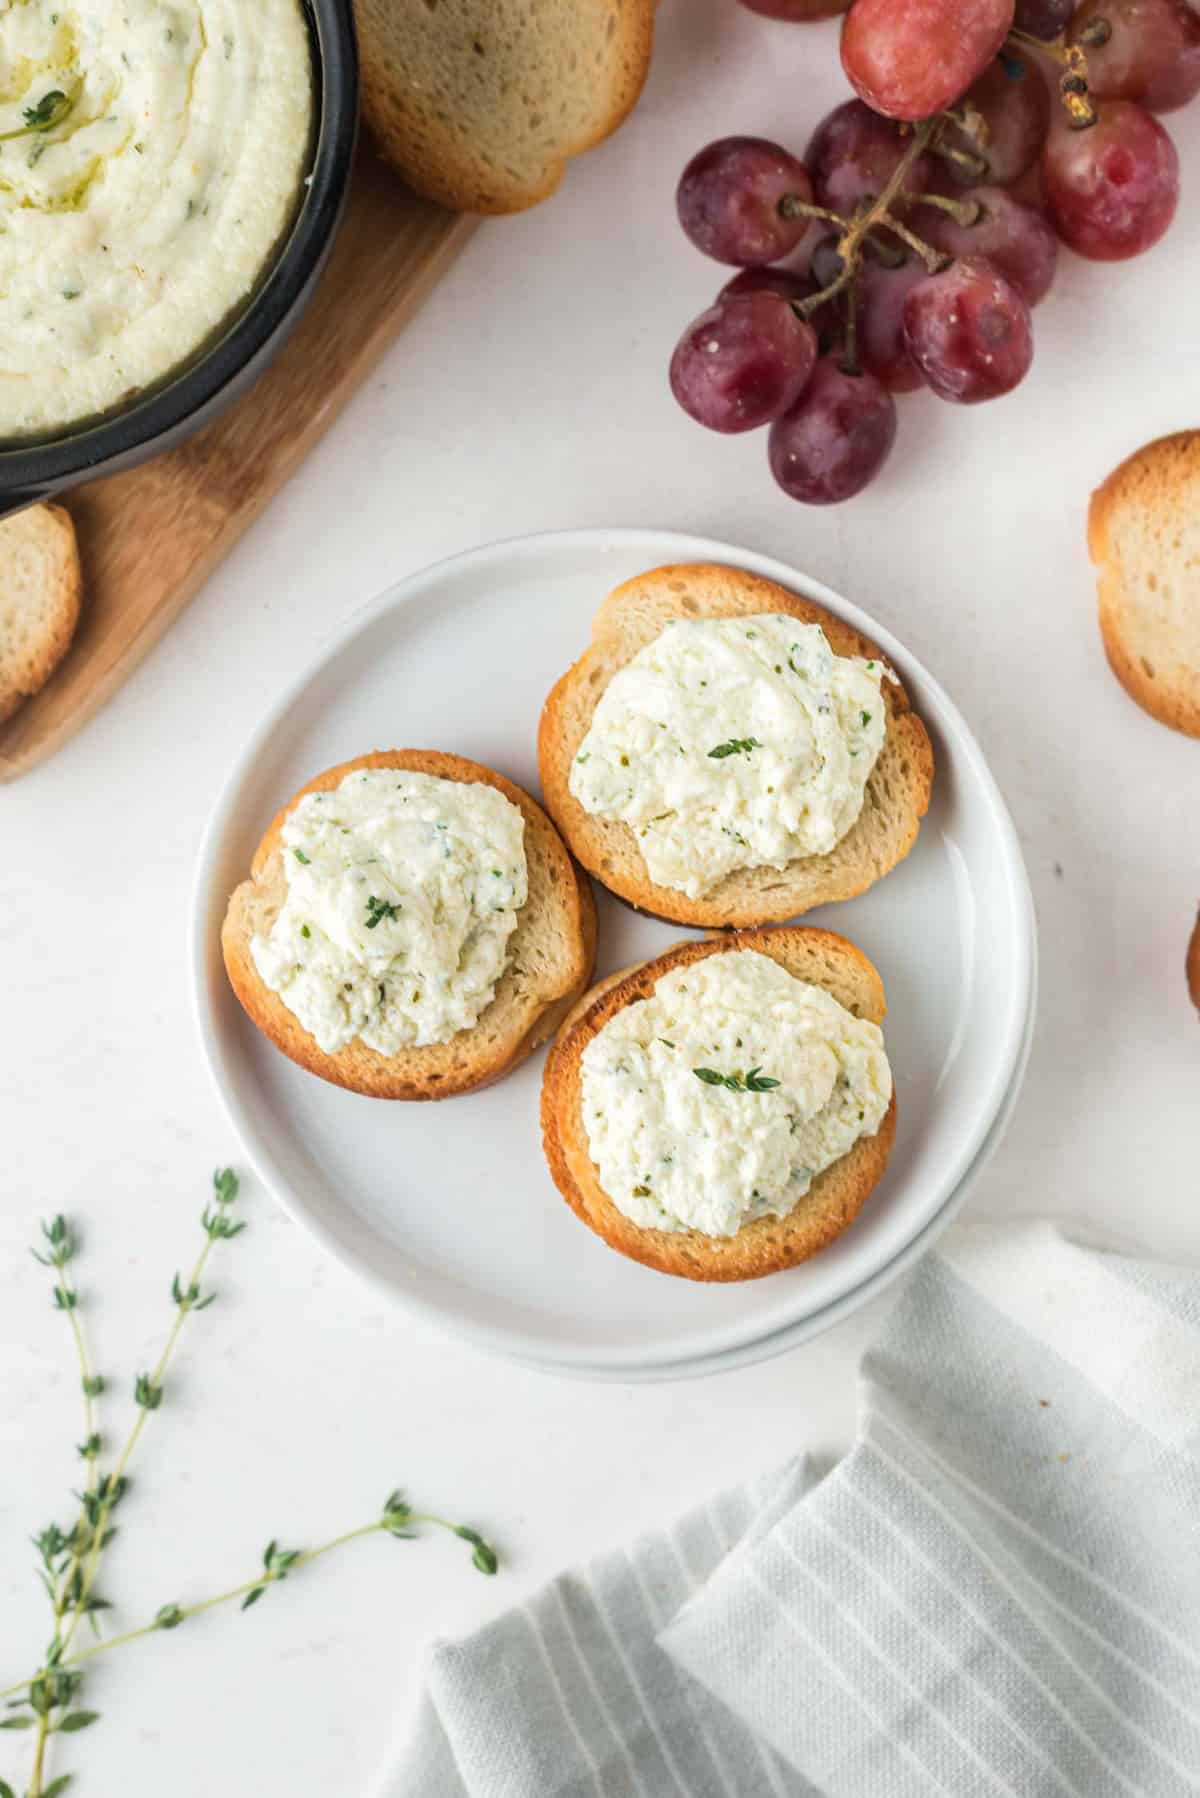 Goat cheese spread on small crostini.